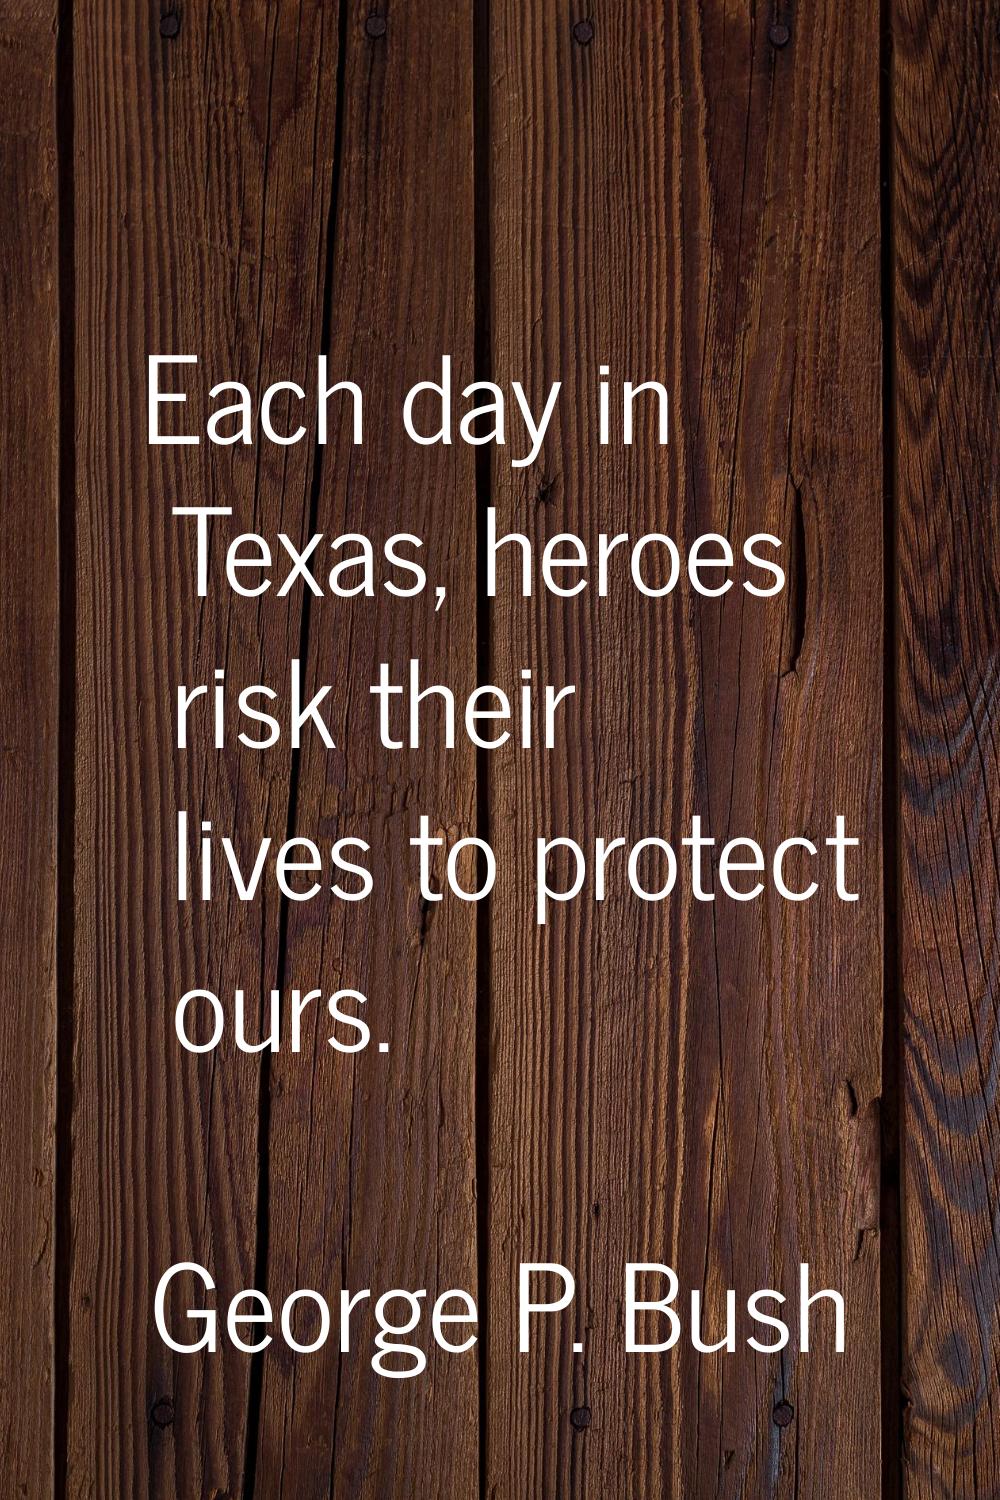 Each day in Texas, heroes risk their lives to protect ours.